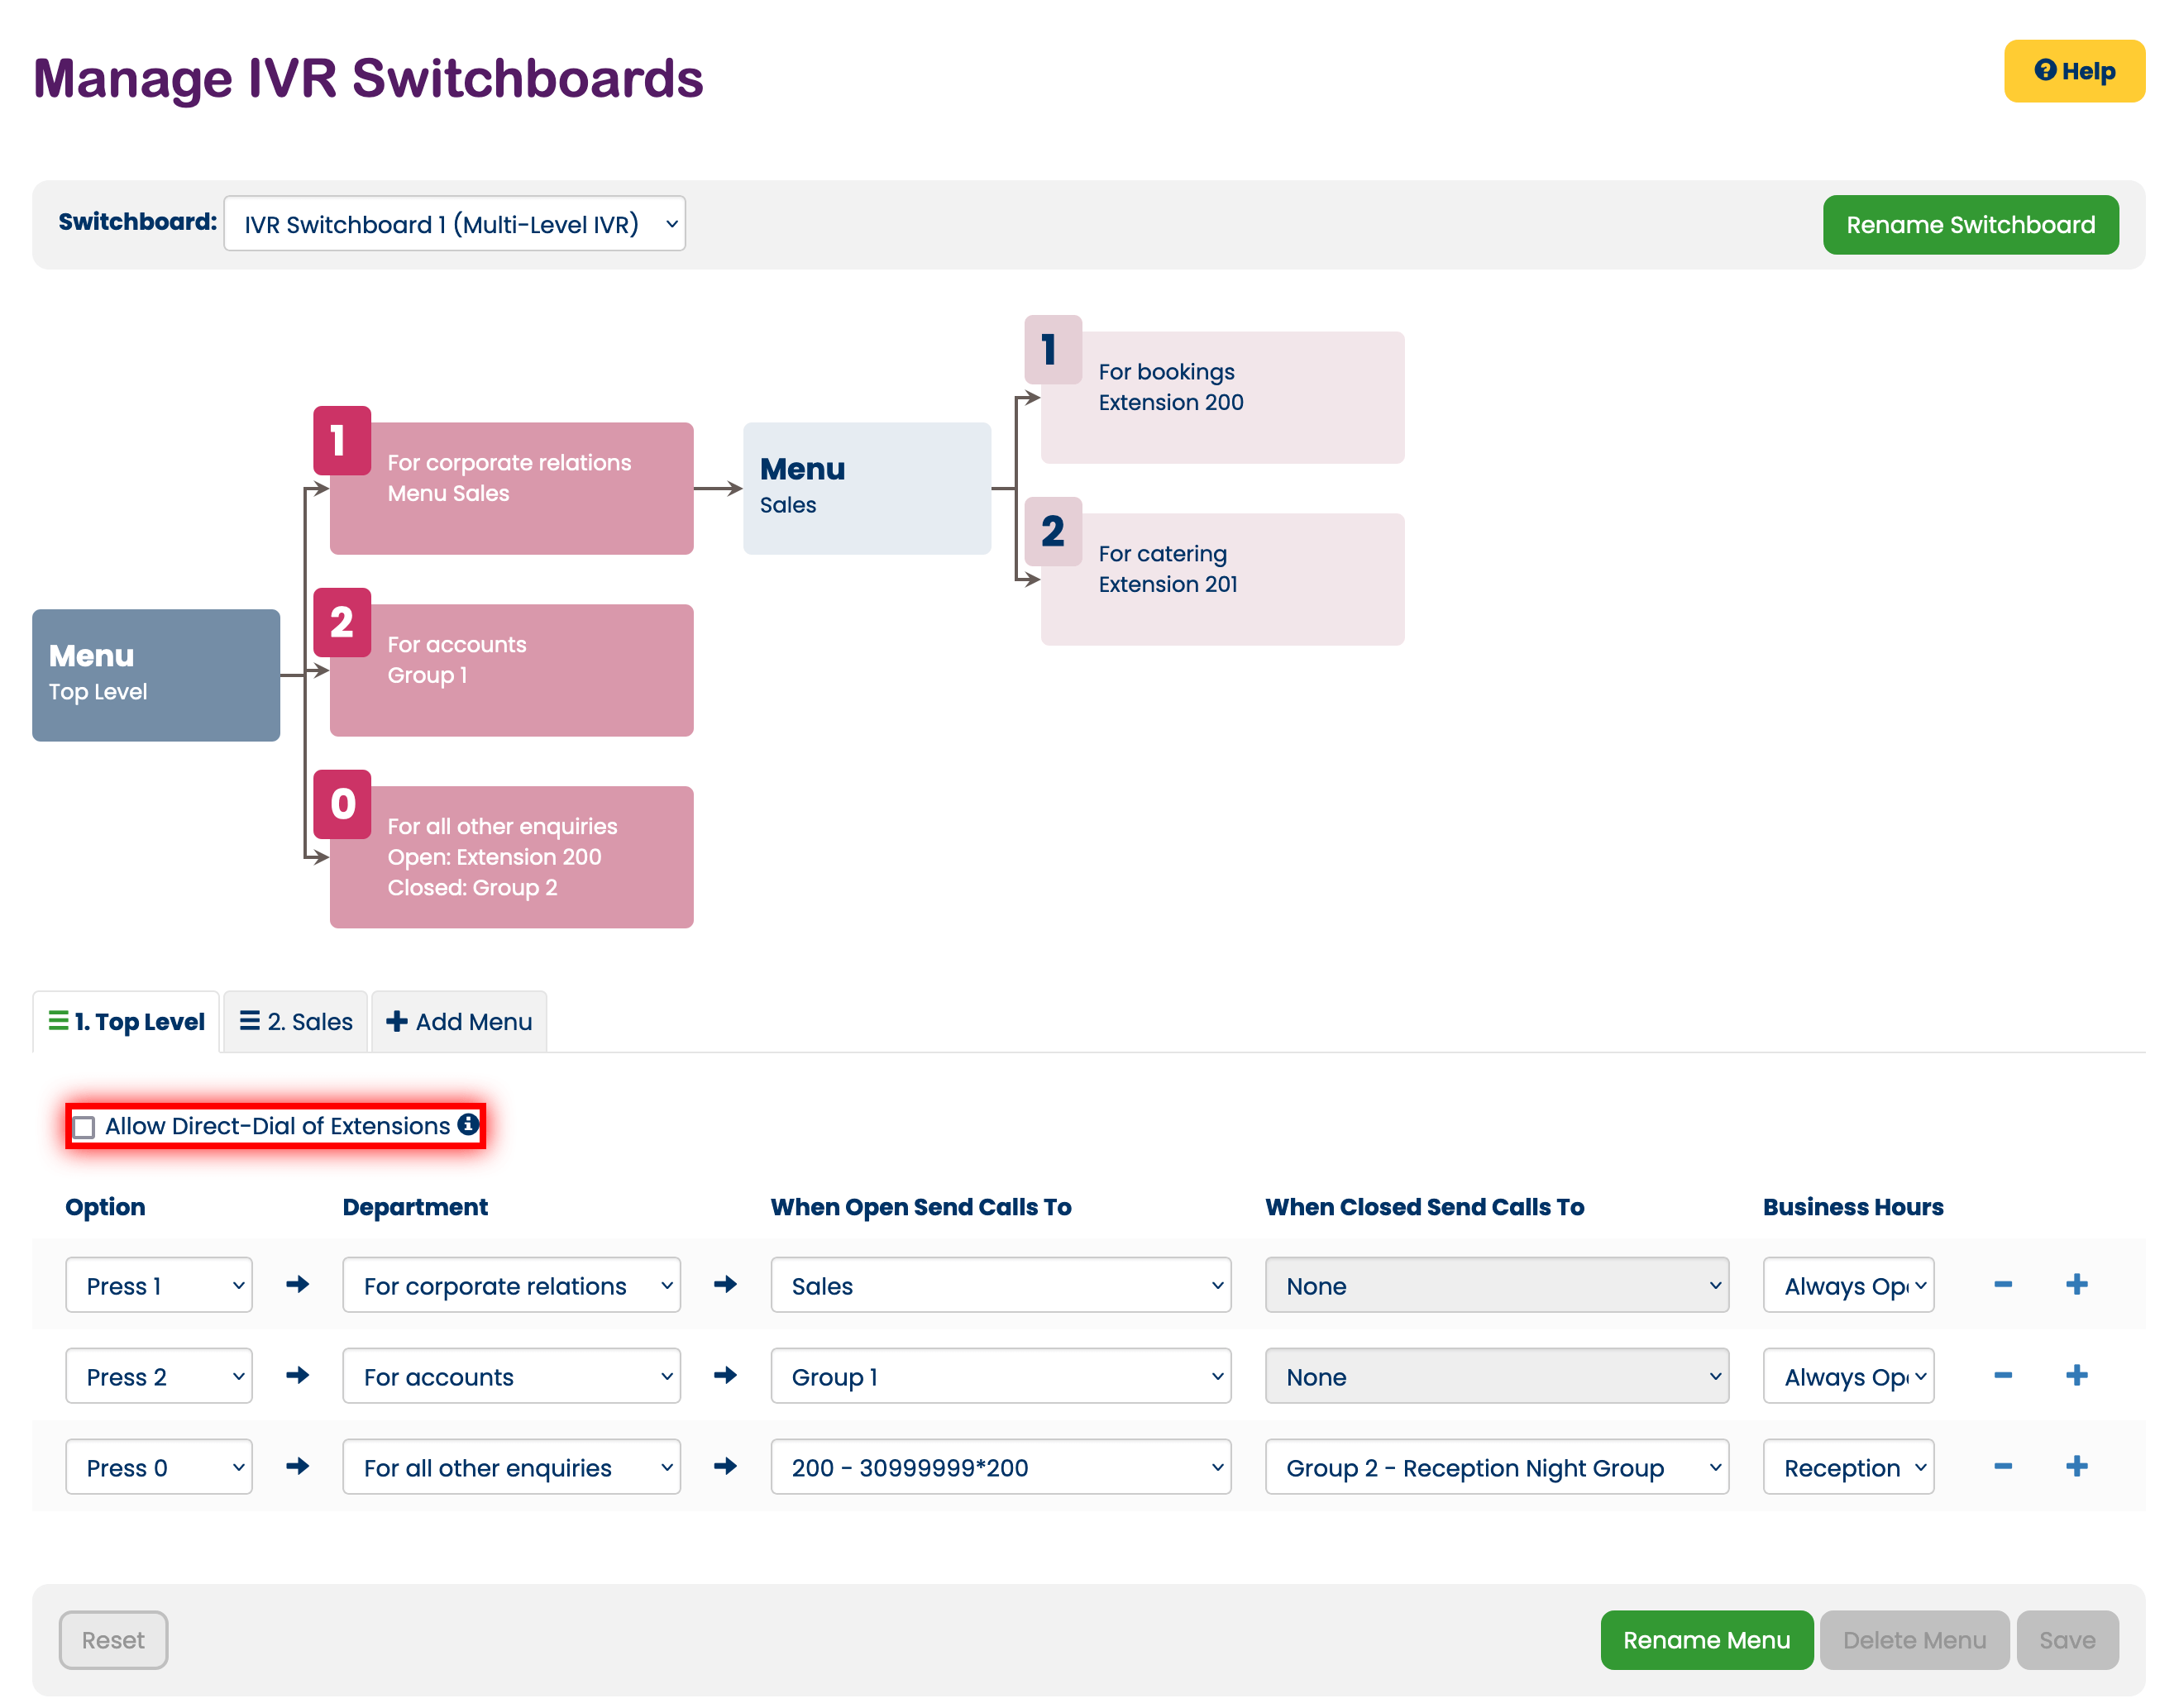 Allowing direct dial of extensions whilst managing IVR menus